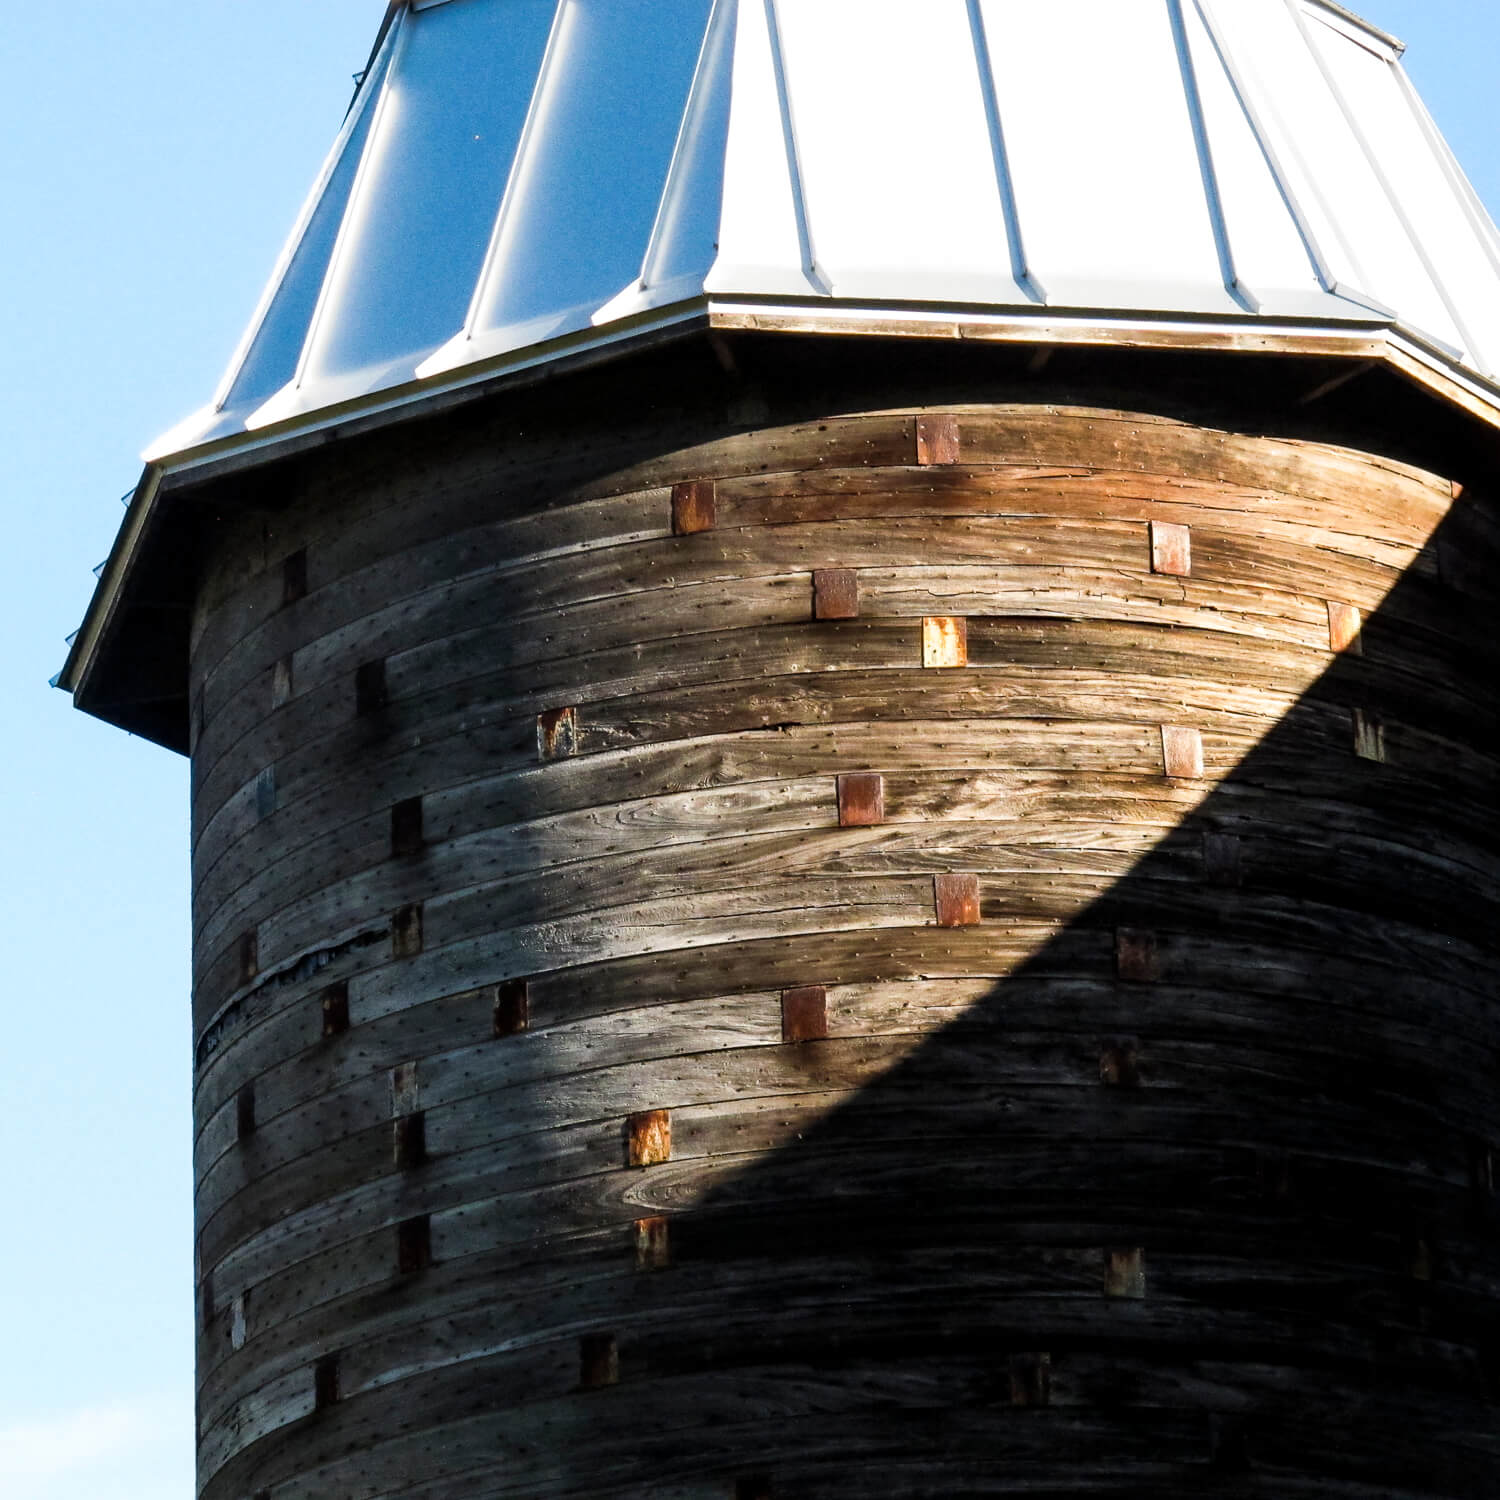 A close up view of a grain silo with wooden slat siding